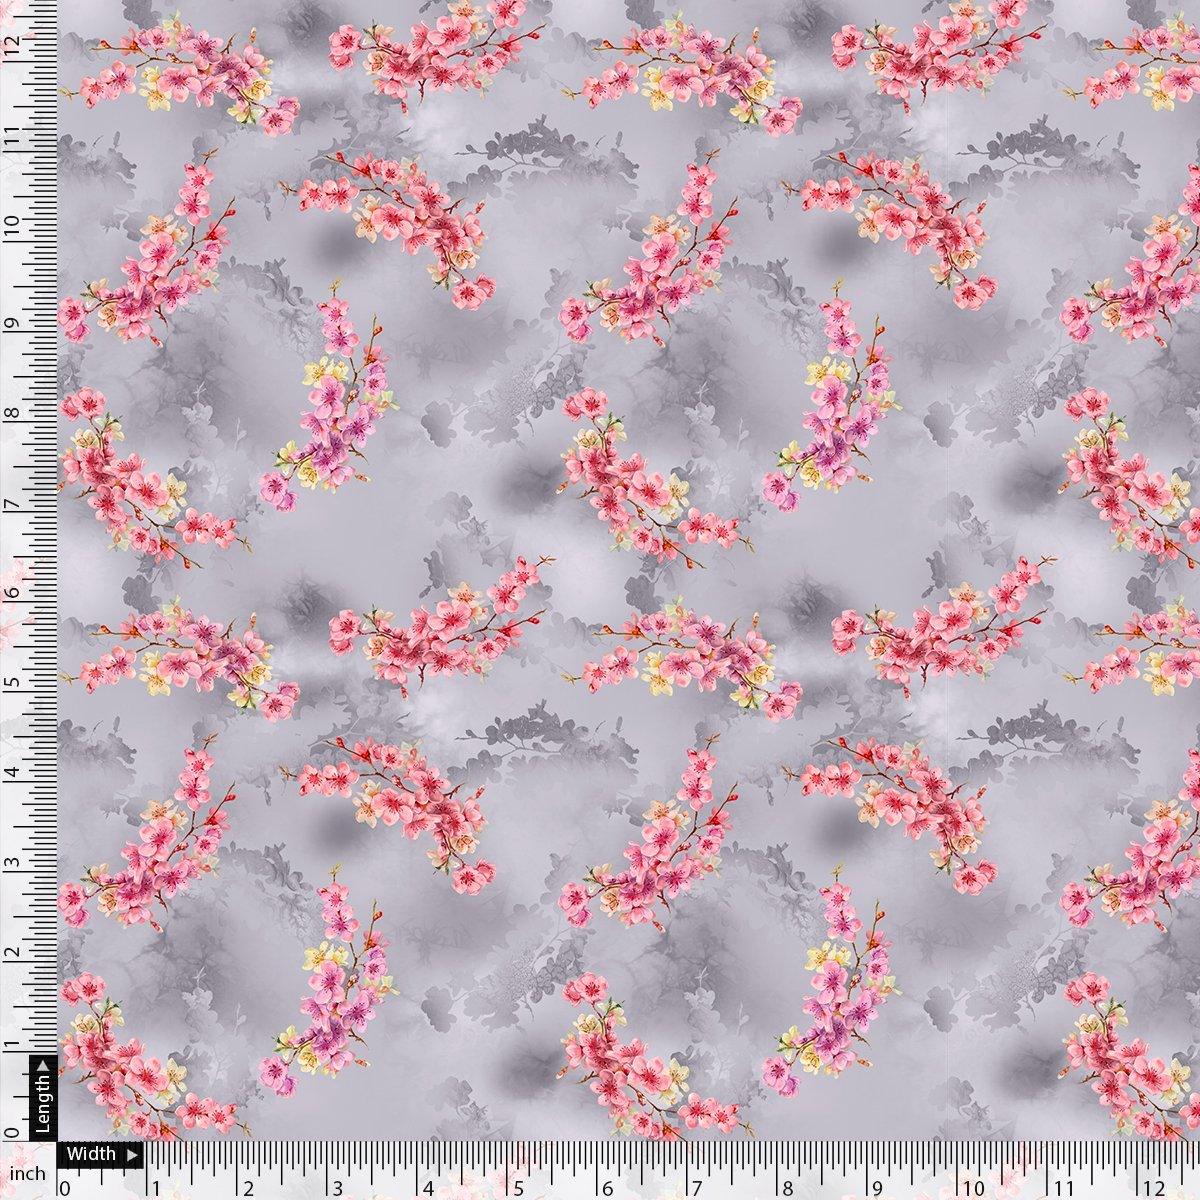 Tiny Pink Violet Floral Flower Digital Printed Fabric - Weightless - FAB VOGUE Studio®